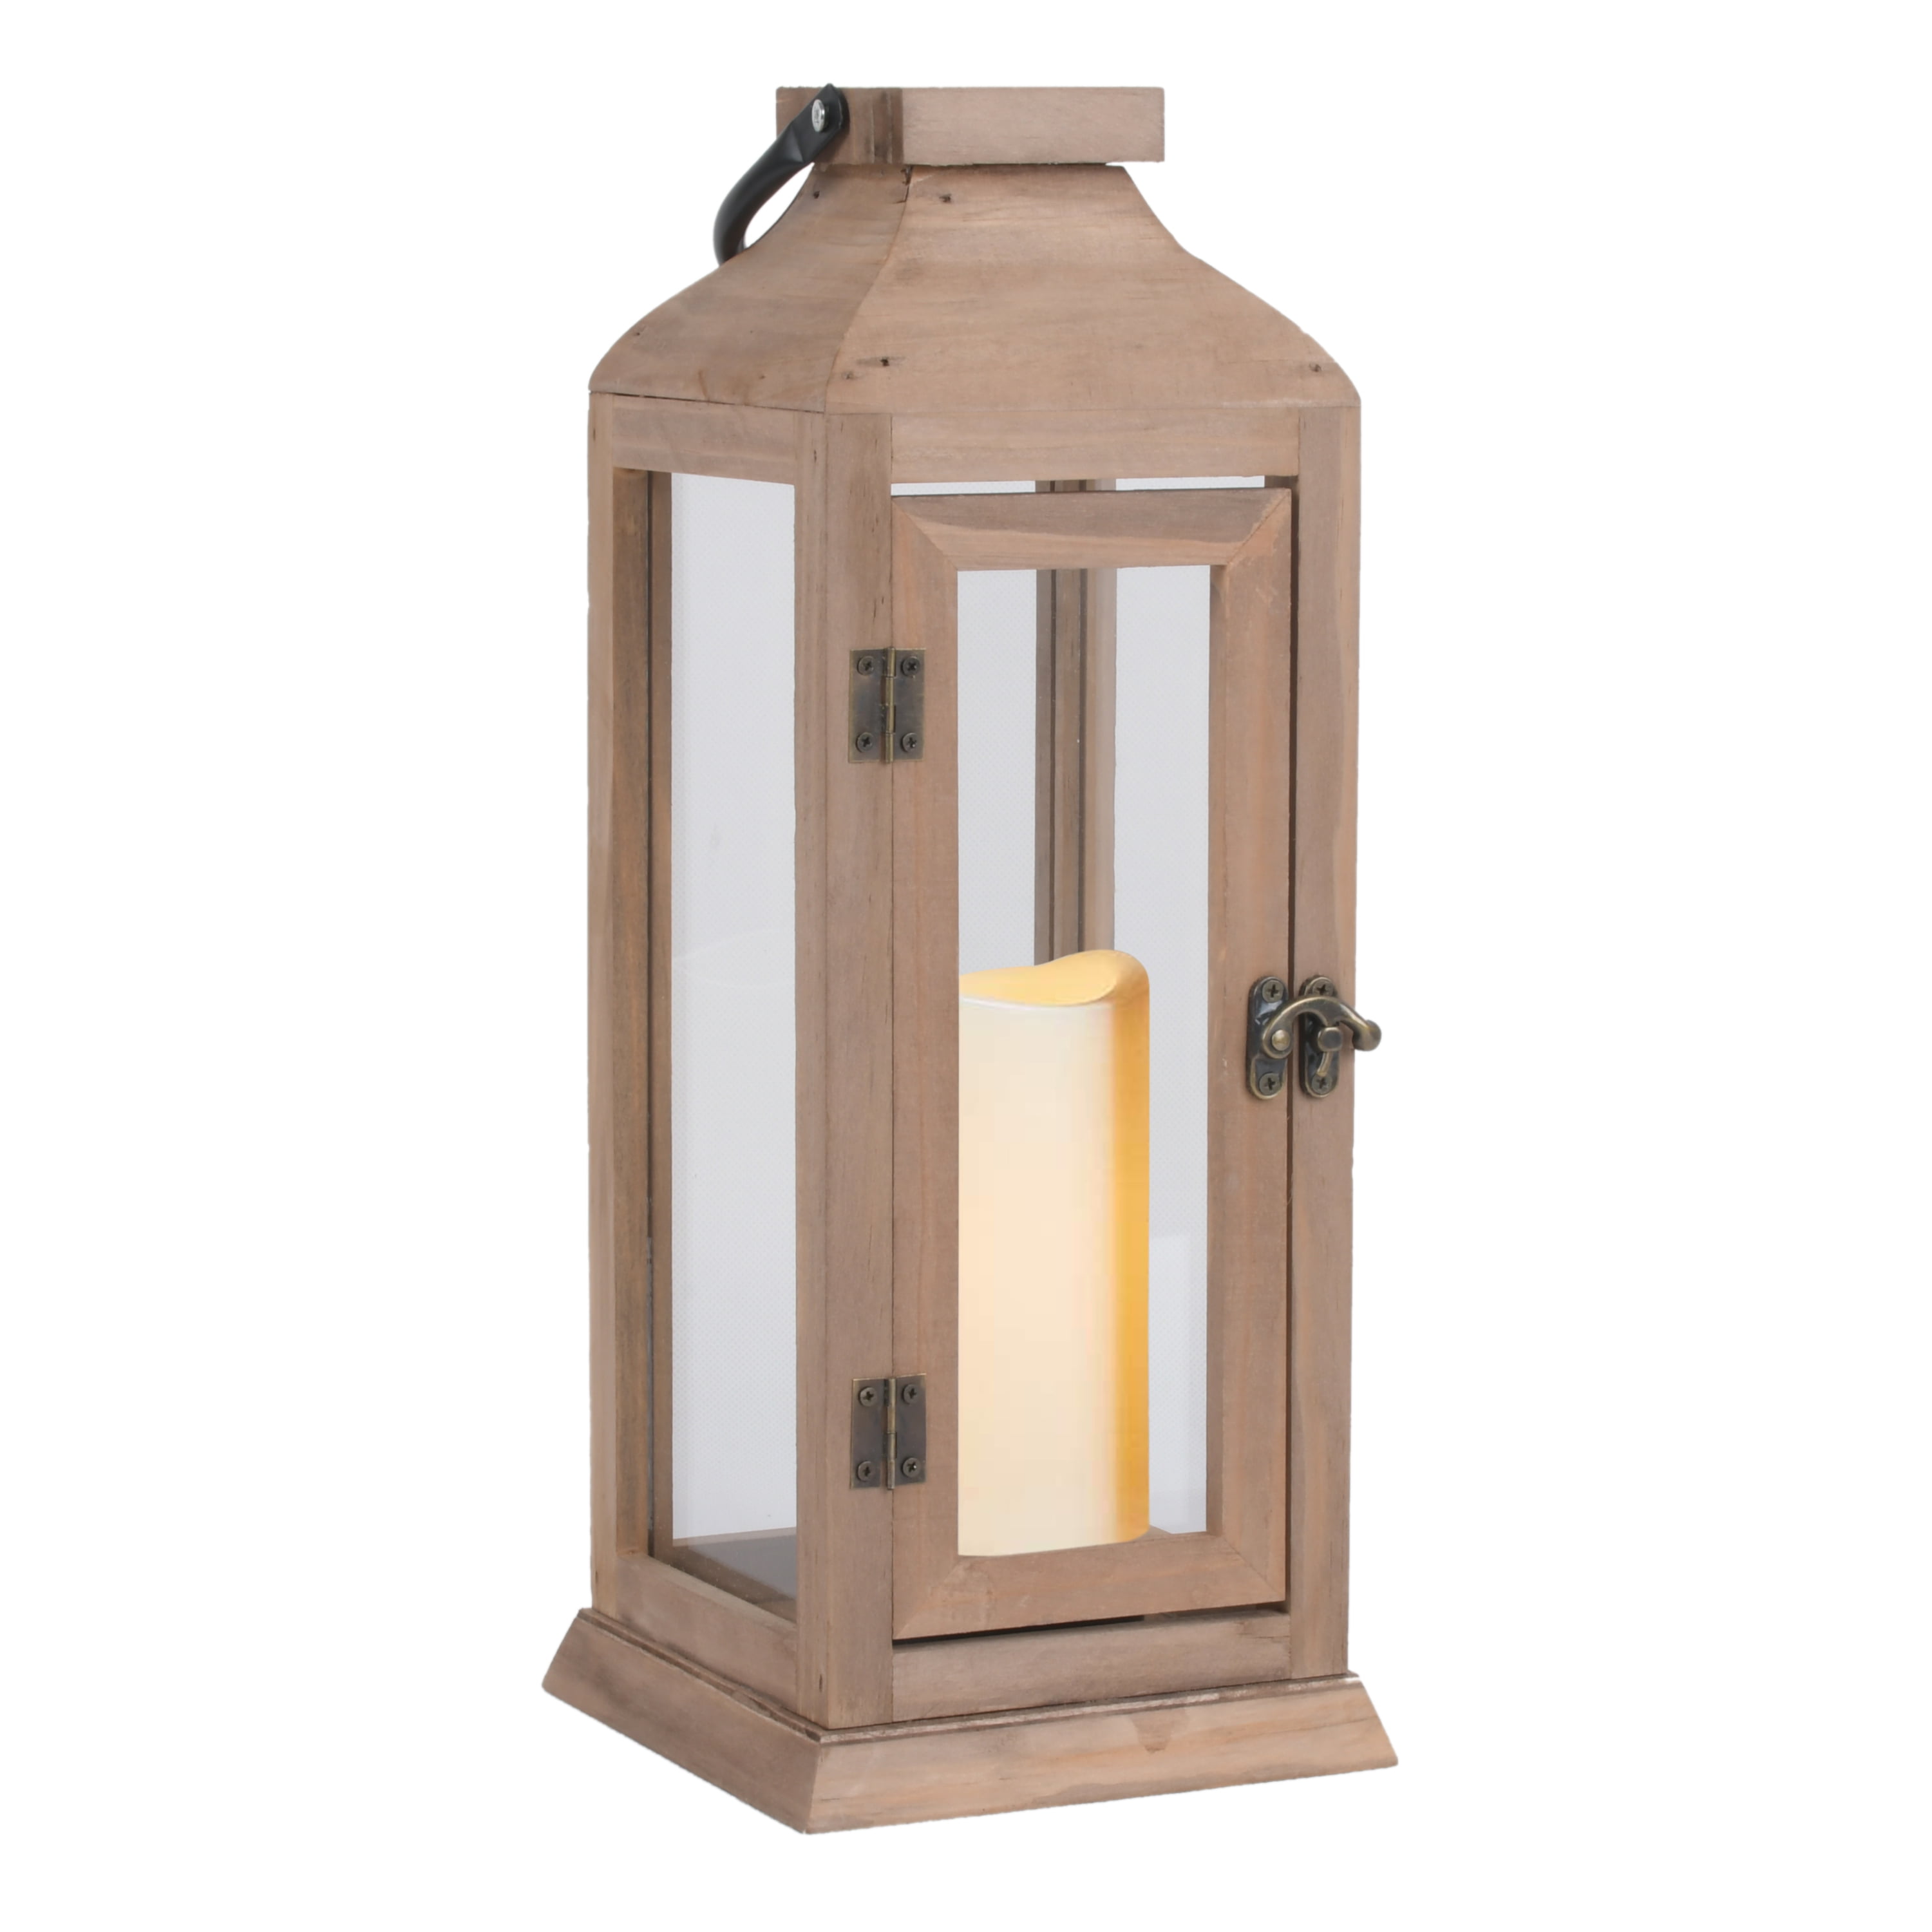 29.5 in. and 36 in. Backyard Expressions White Indoor/Outdoor Wooden Lantern Set (2-Pack)